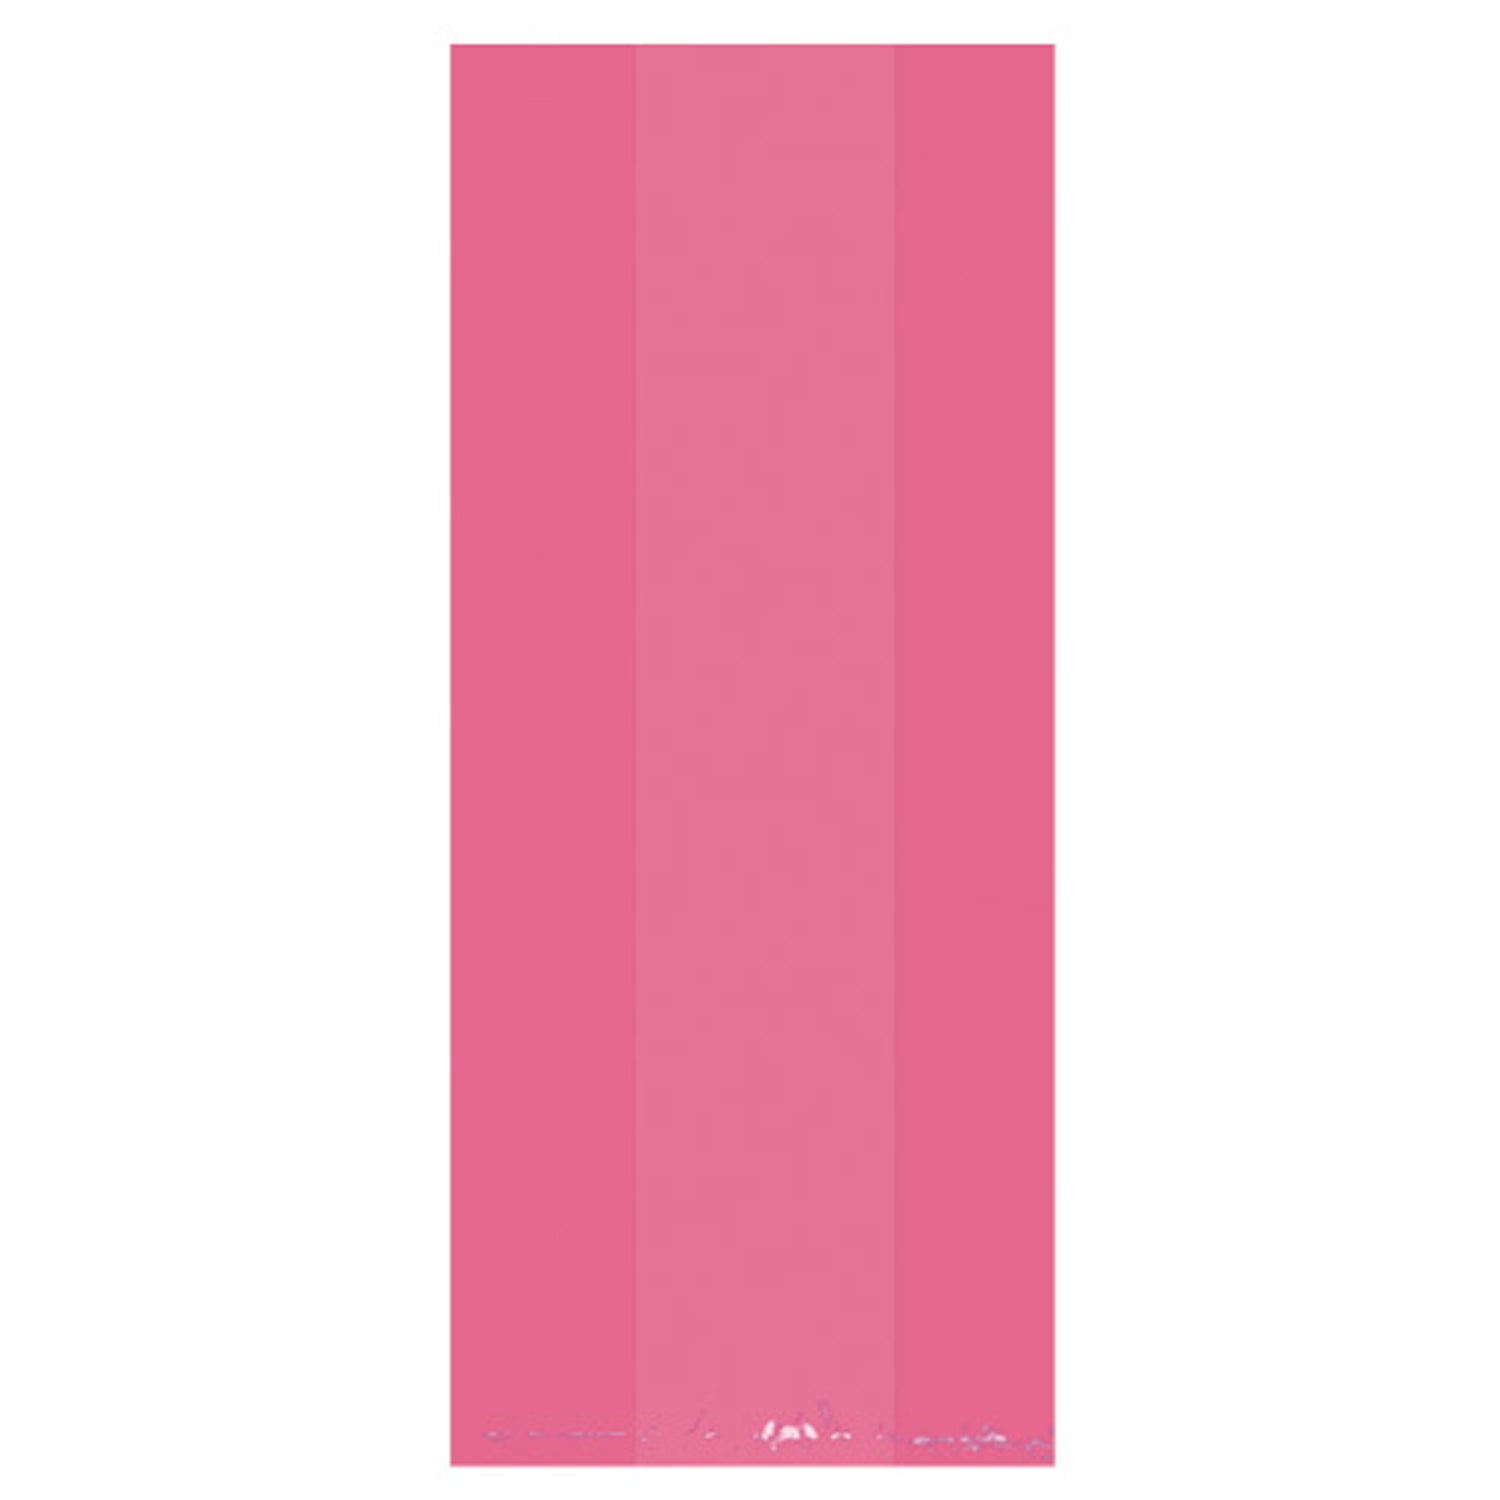 Small Bright Pink Plastic Party Bags, 24cm x 10cm.